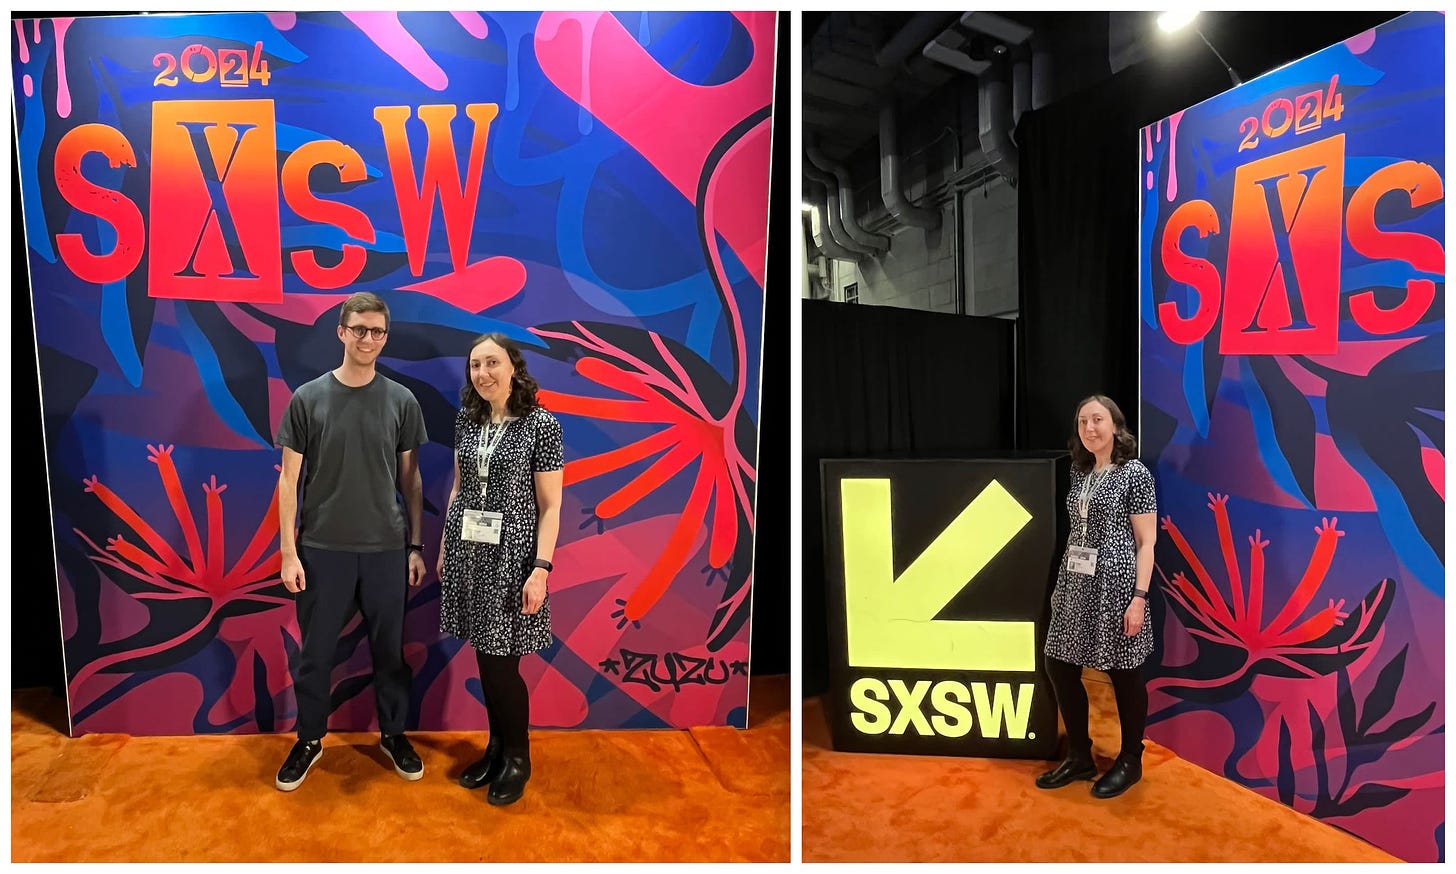 Pictures in front of the SXSW photo art display, which is decorated with bright blue/orange/pink floral imagery and swirls, over an orange carpet.